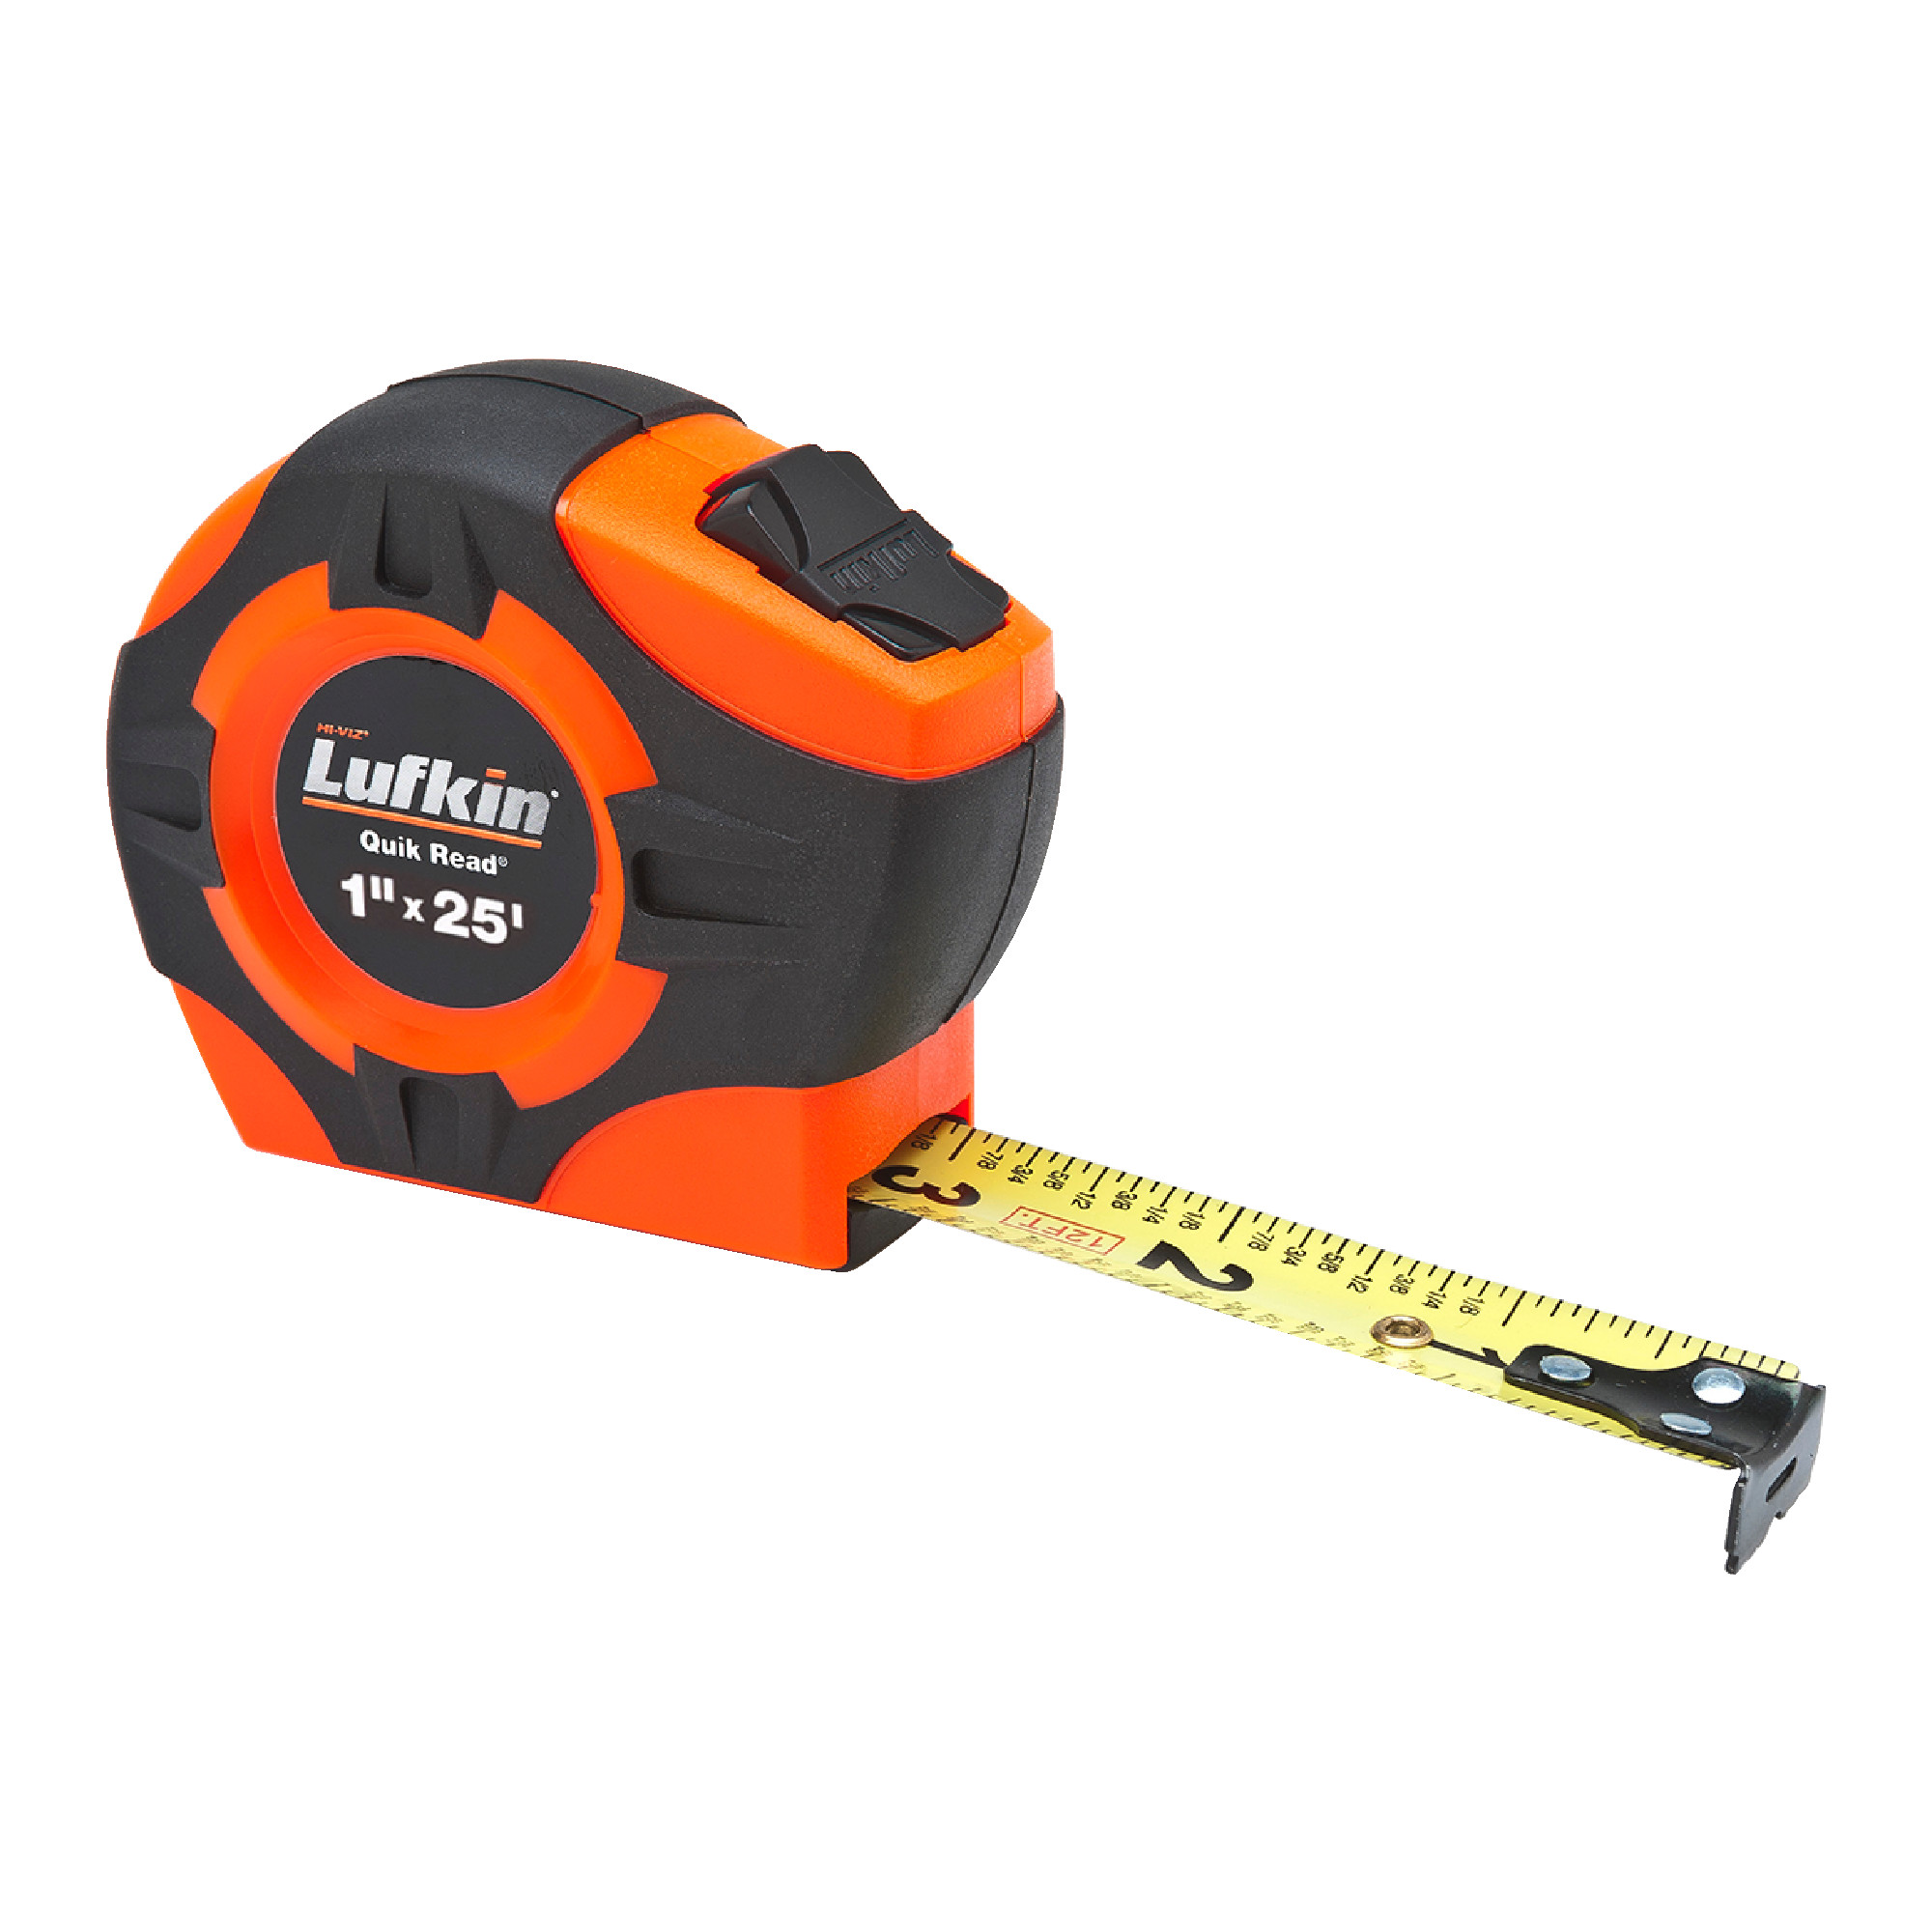 Quickread Measuring Tape